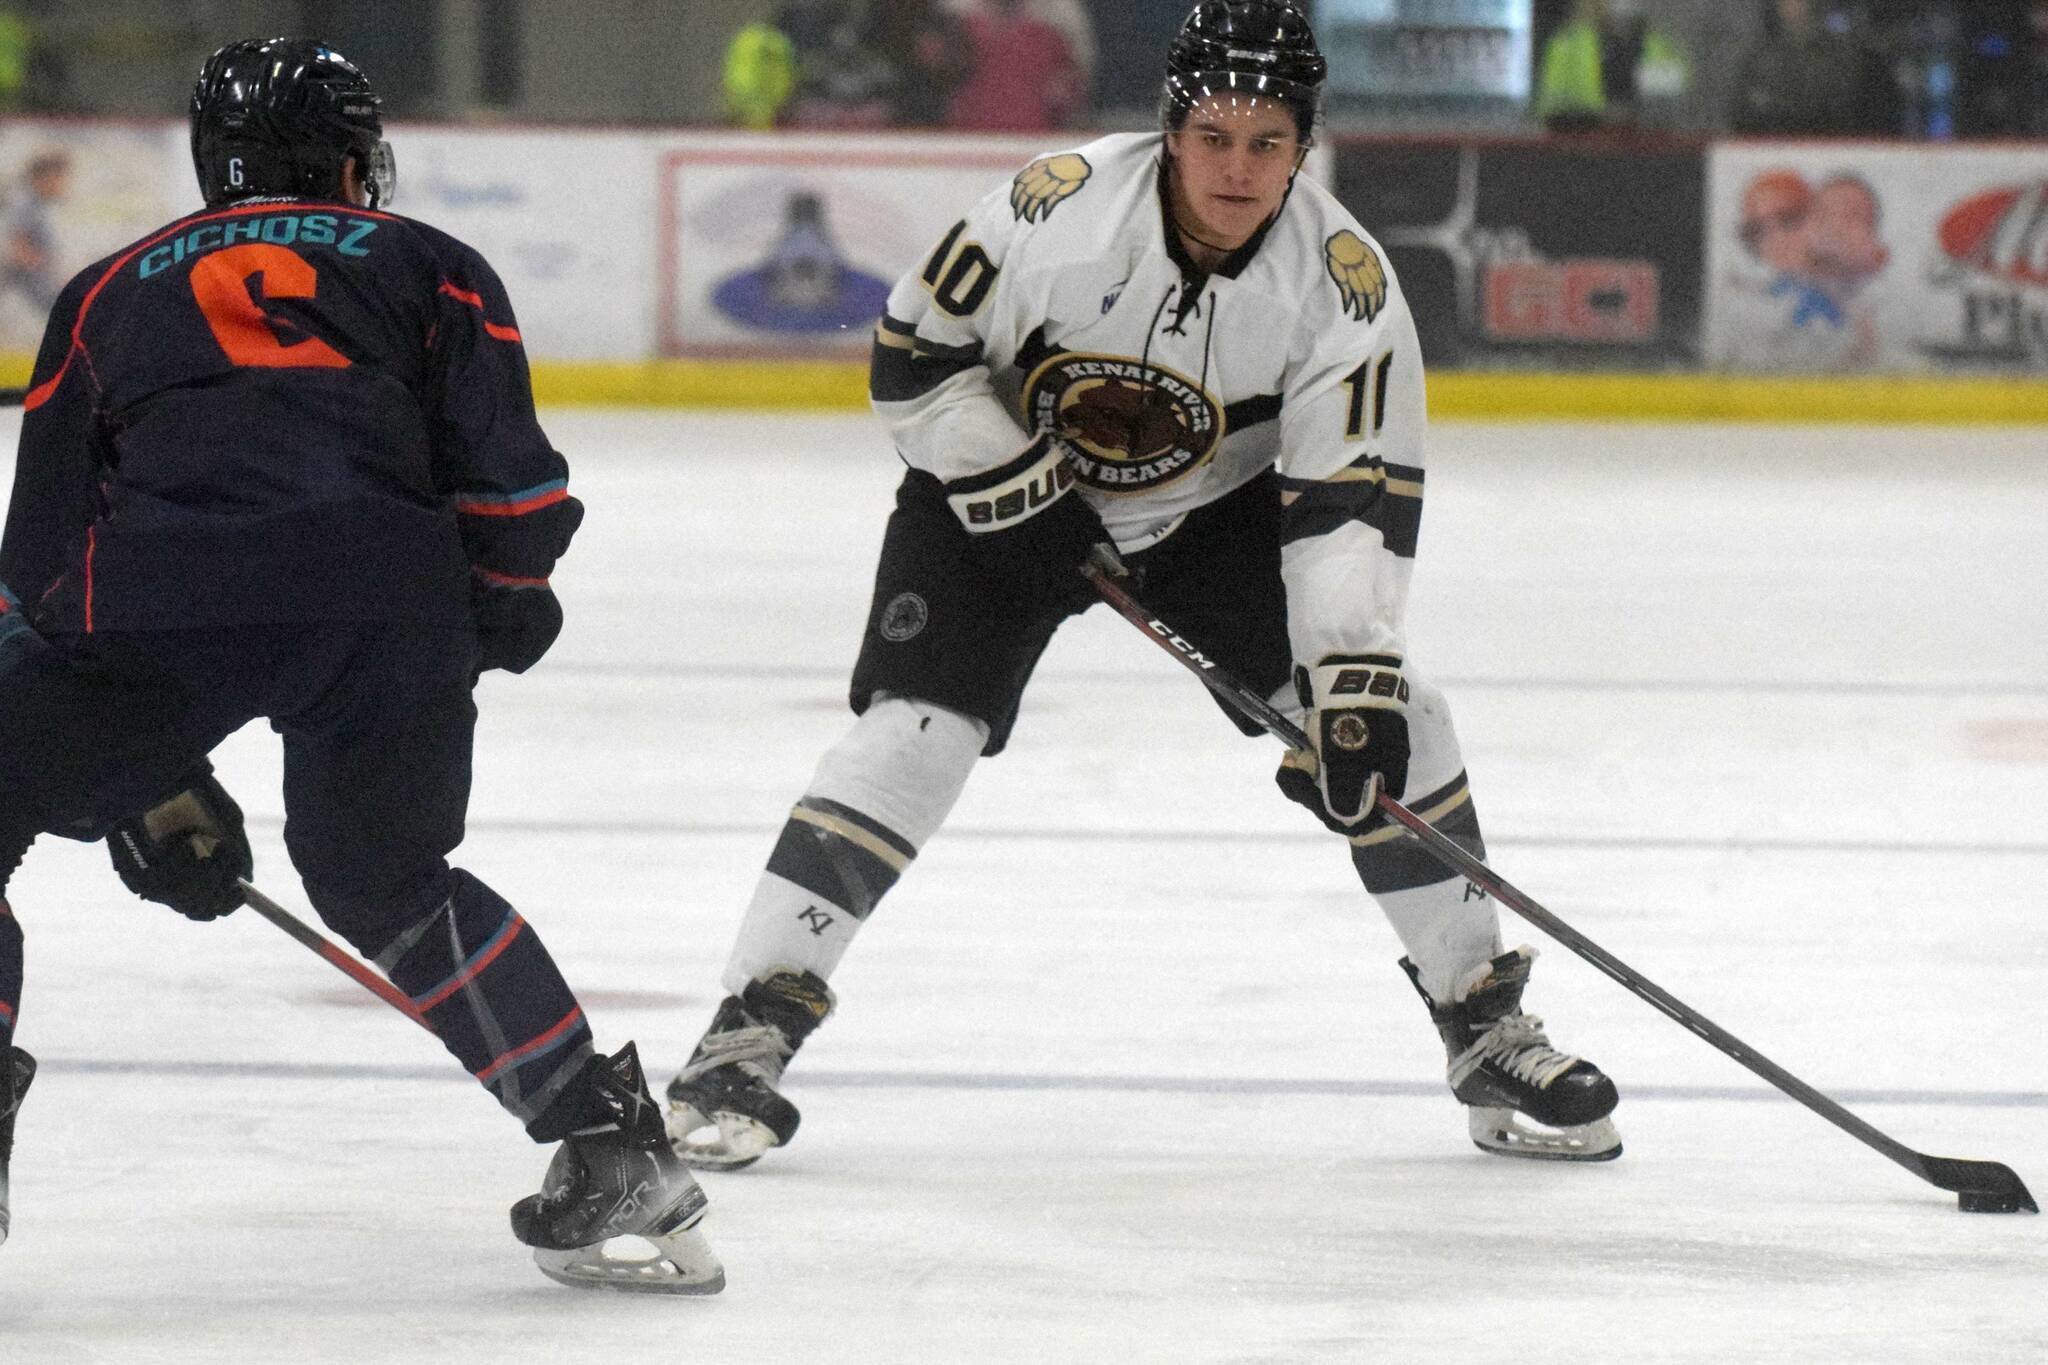 Kenai River Brown Bears forward Caden Triggs carries the puck against Anchorage Wolverines defenseman Campbell Cichosz on Friday, Nov. 5, 2021, at the Soldotna Regional Sports Complex in Soldotna, Alaska. (Photo by Jeff Helminiak/Peninsula Clarion)